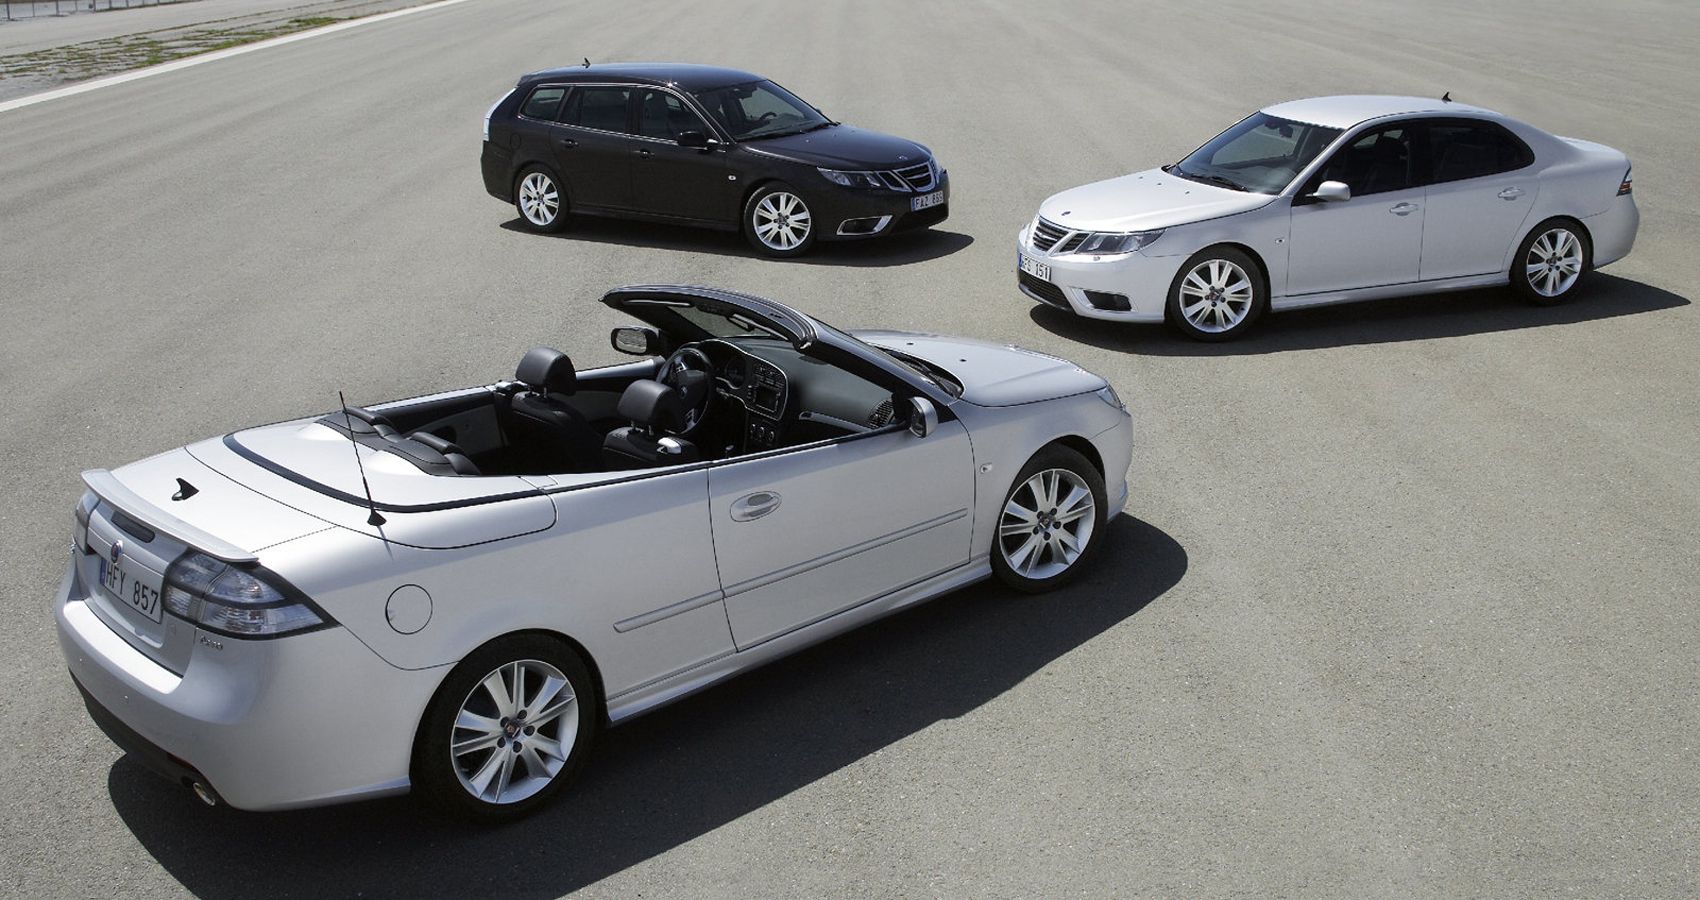 The 9-3 sedan, convertible and SportCombi next to each other